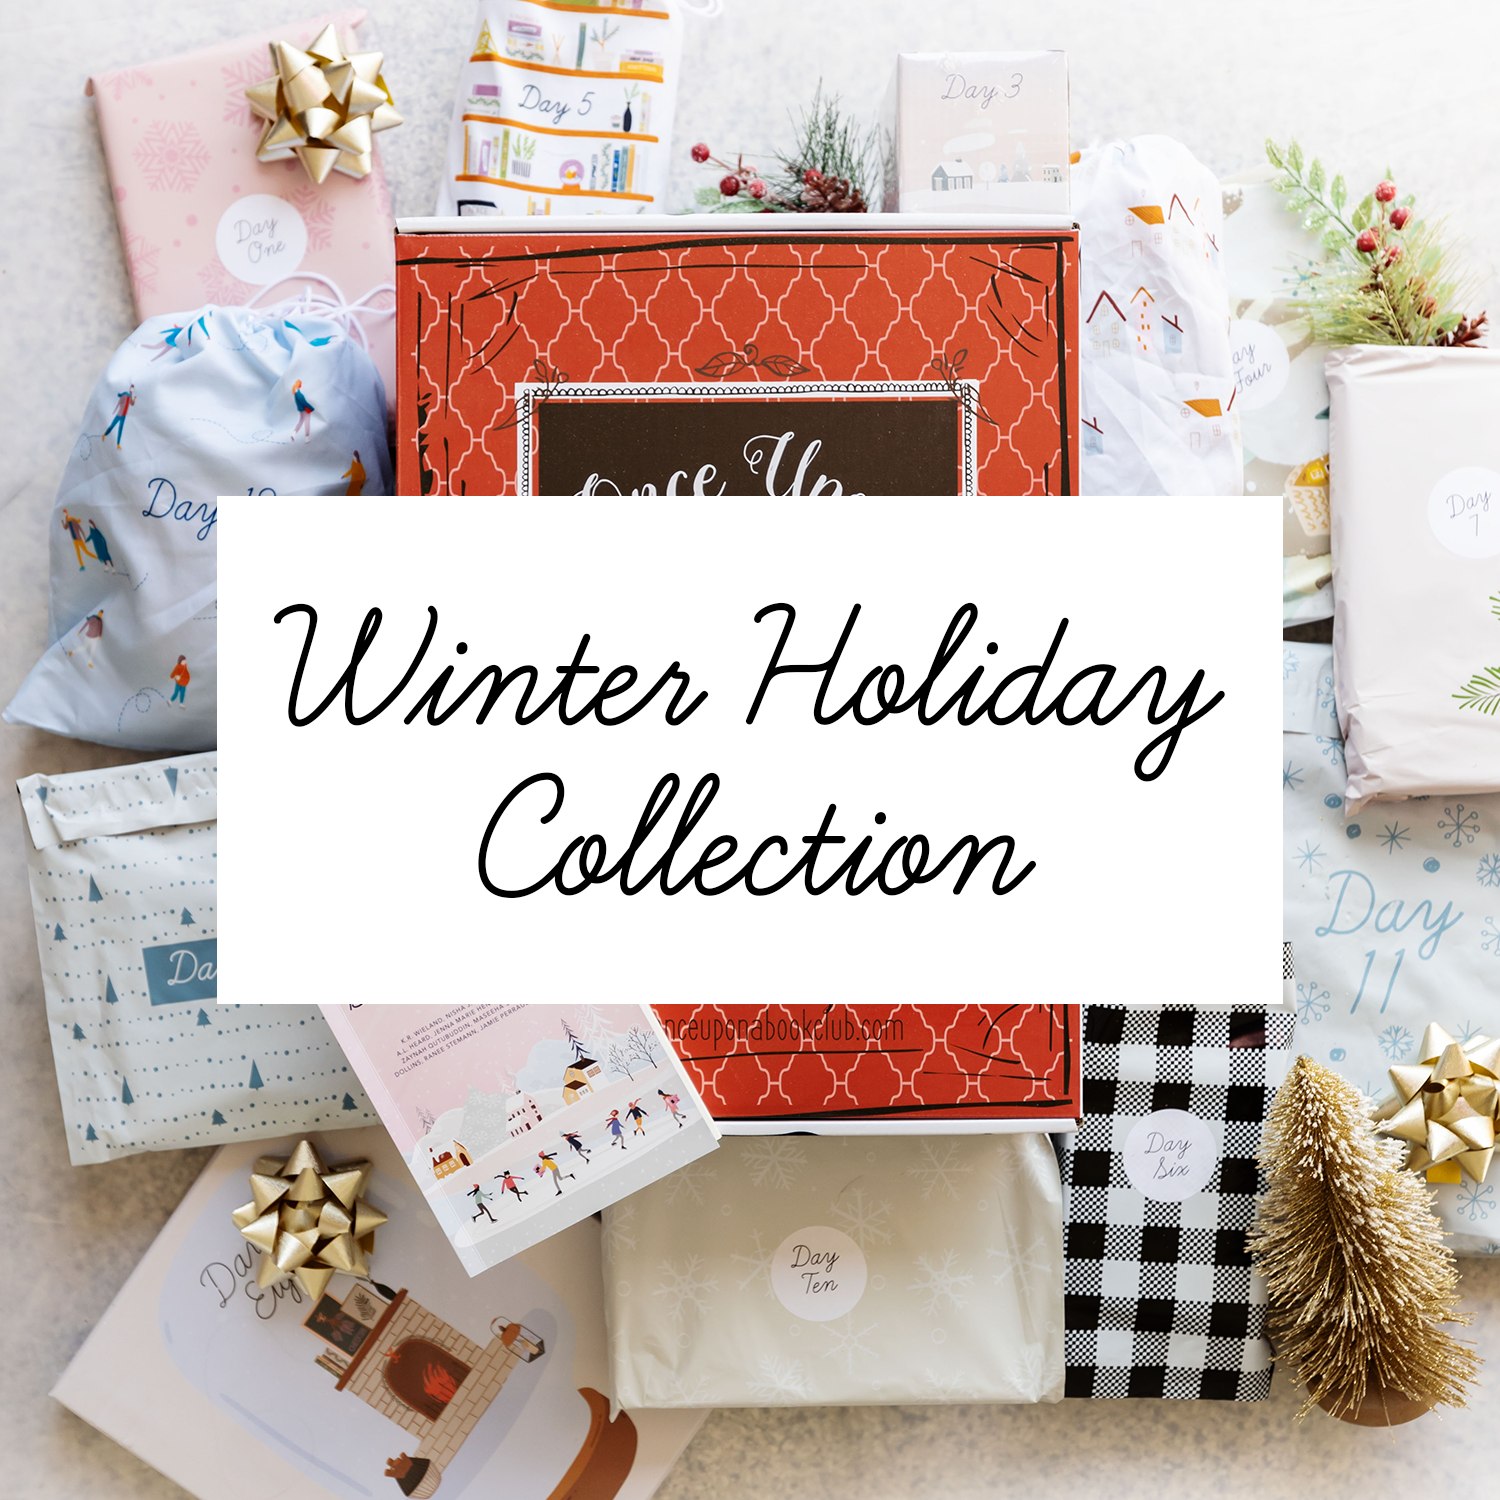 "Winter Holiday Collection" is centered over a background of wrapped gifts